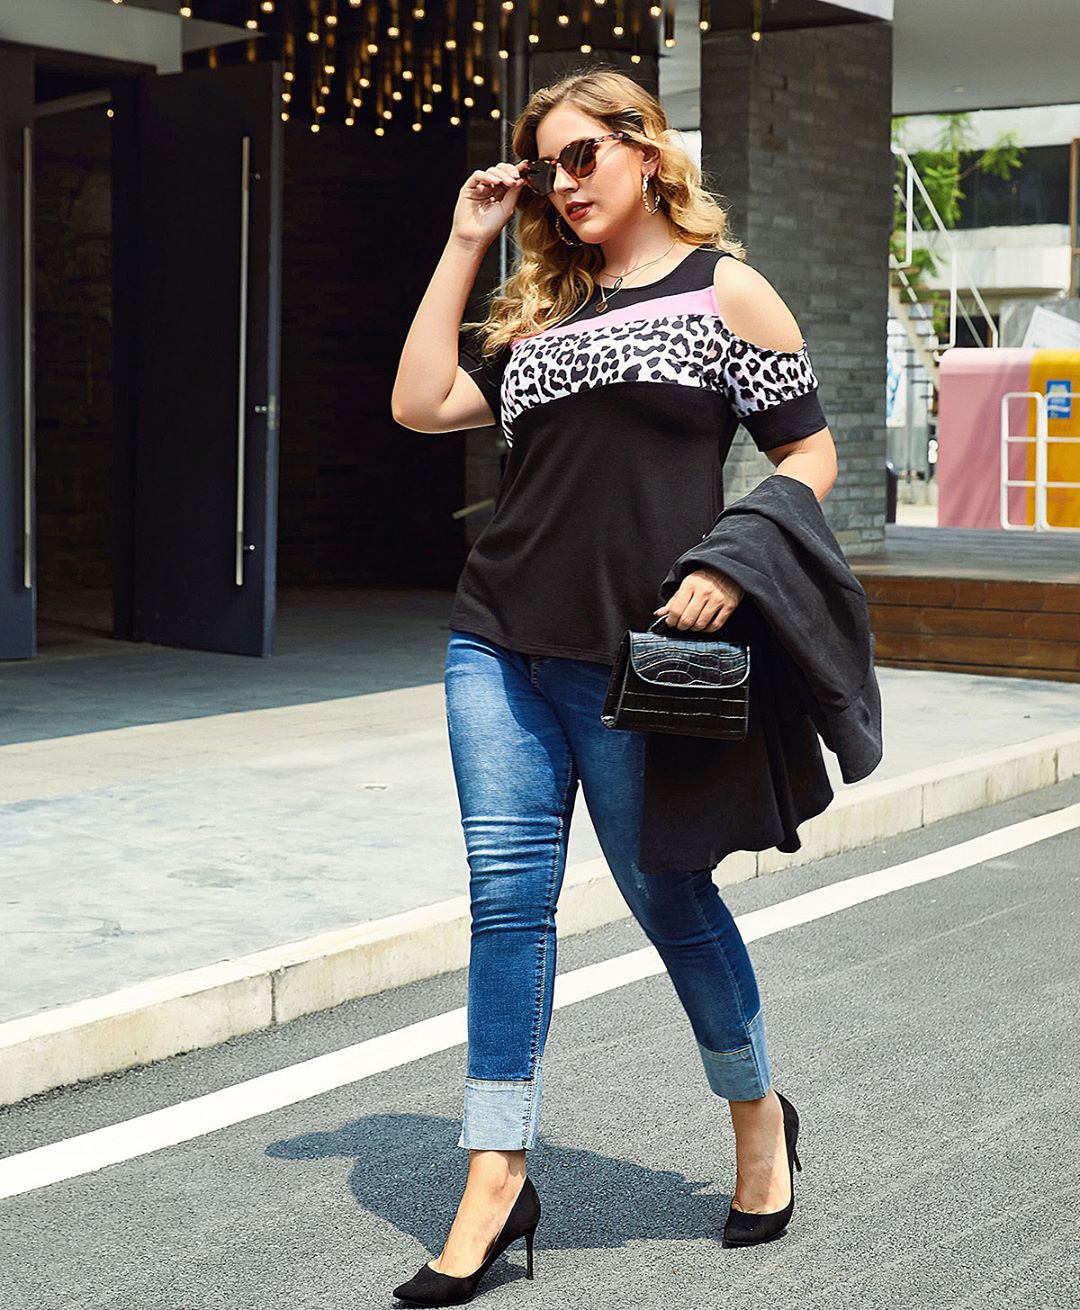 Rosegal - Open Shoulder Plus Size Top⁣
⁣
Please search ID:468285702 on Rosegal.com if you like.⁣
Use Code: RGH20 to enjoy 18% off!⁣
#rosegal #plussizefashion #Rosegalcurvygirl #curvygirl⁣
Note: How to...